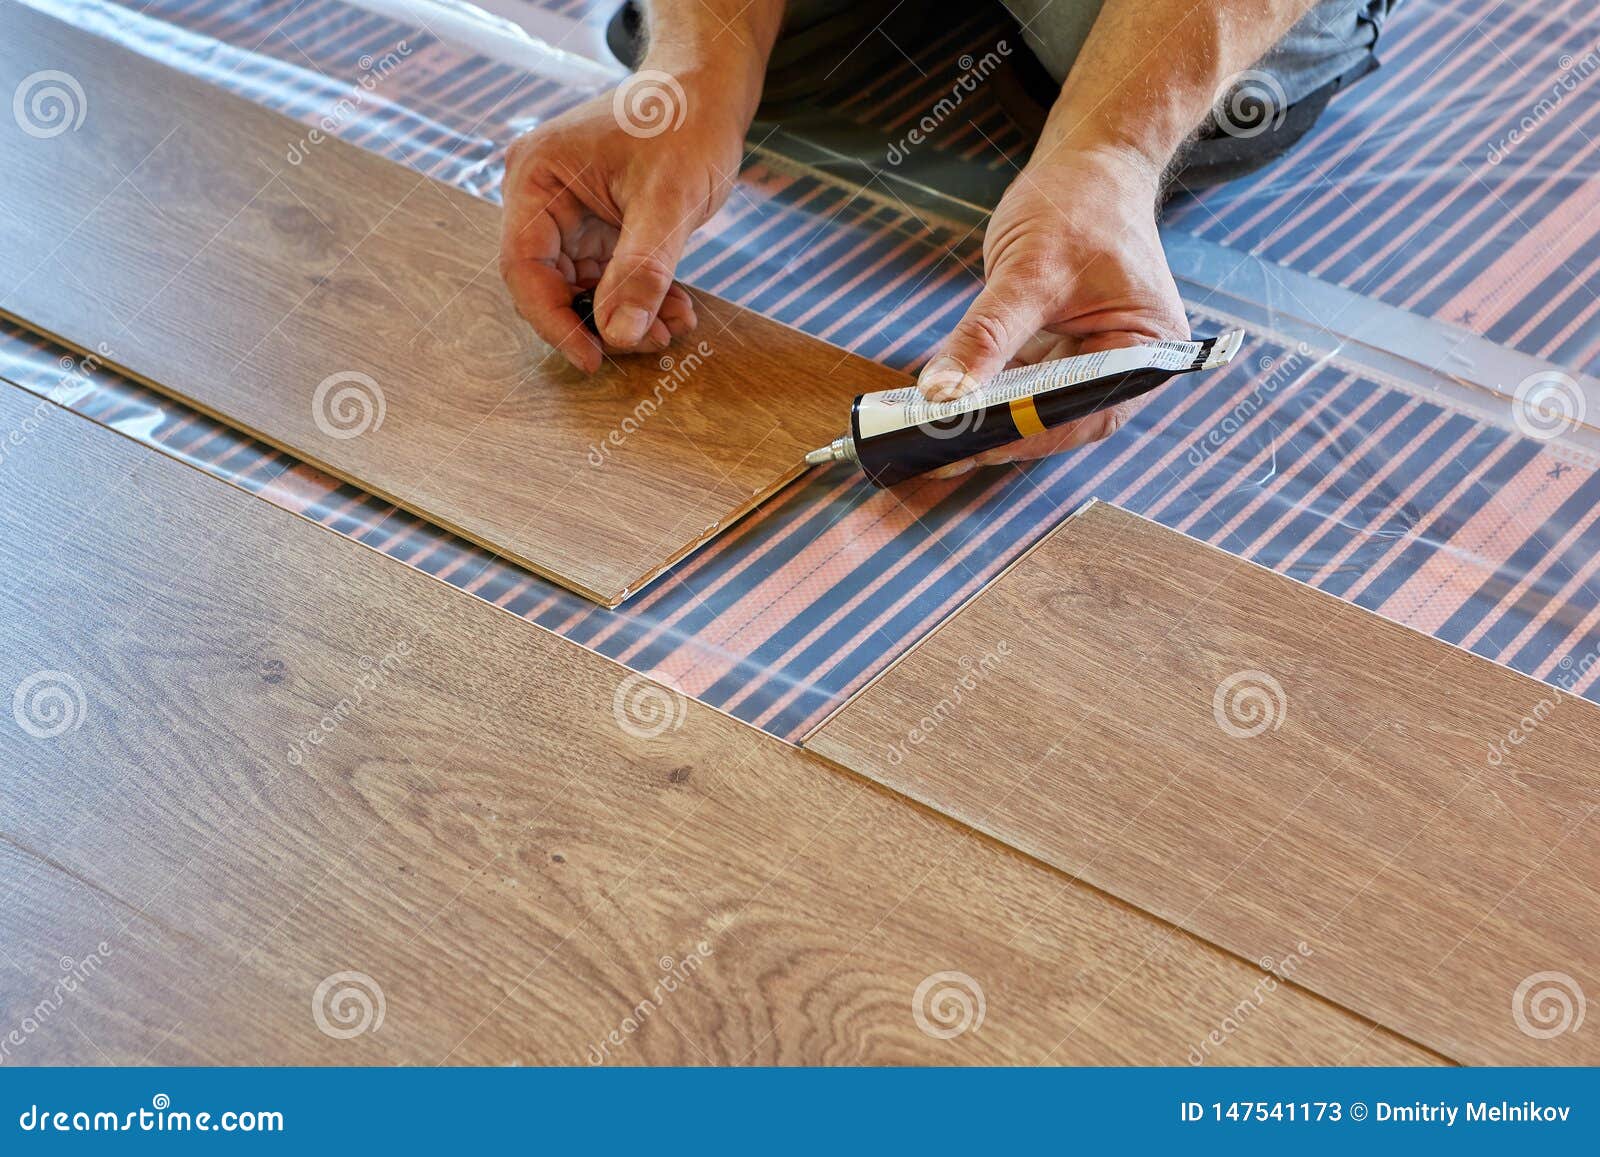 Laying Laminate Covering On Heat Insulated Floor Stock Image